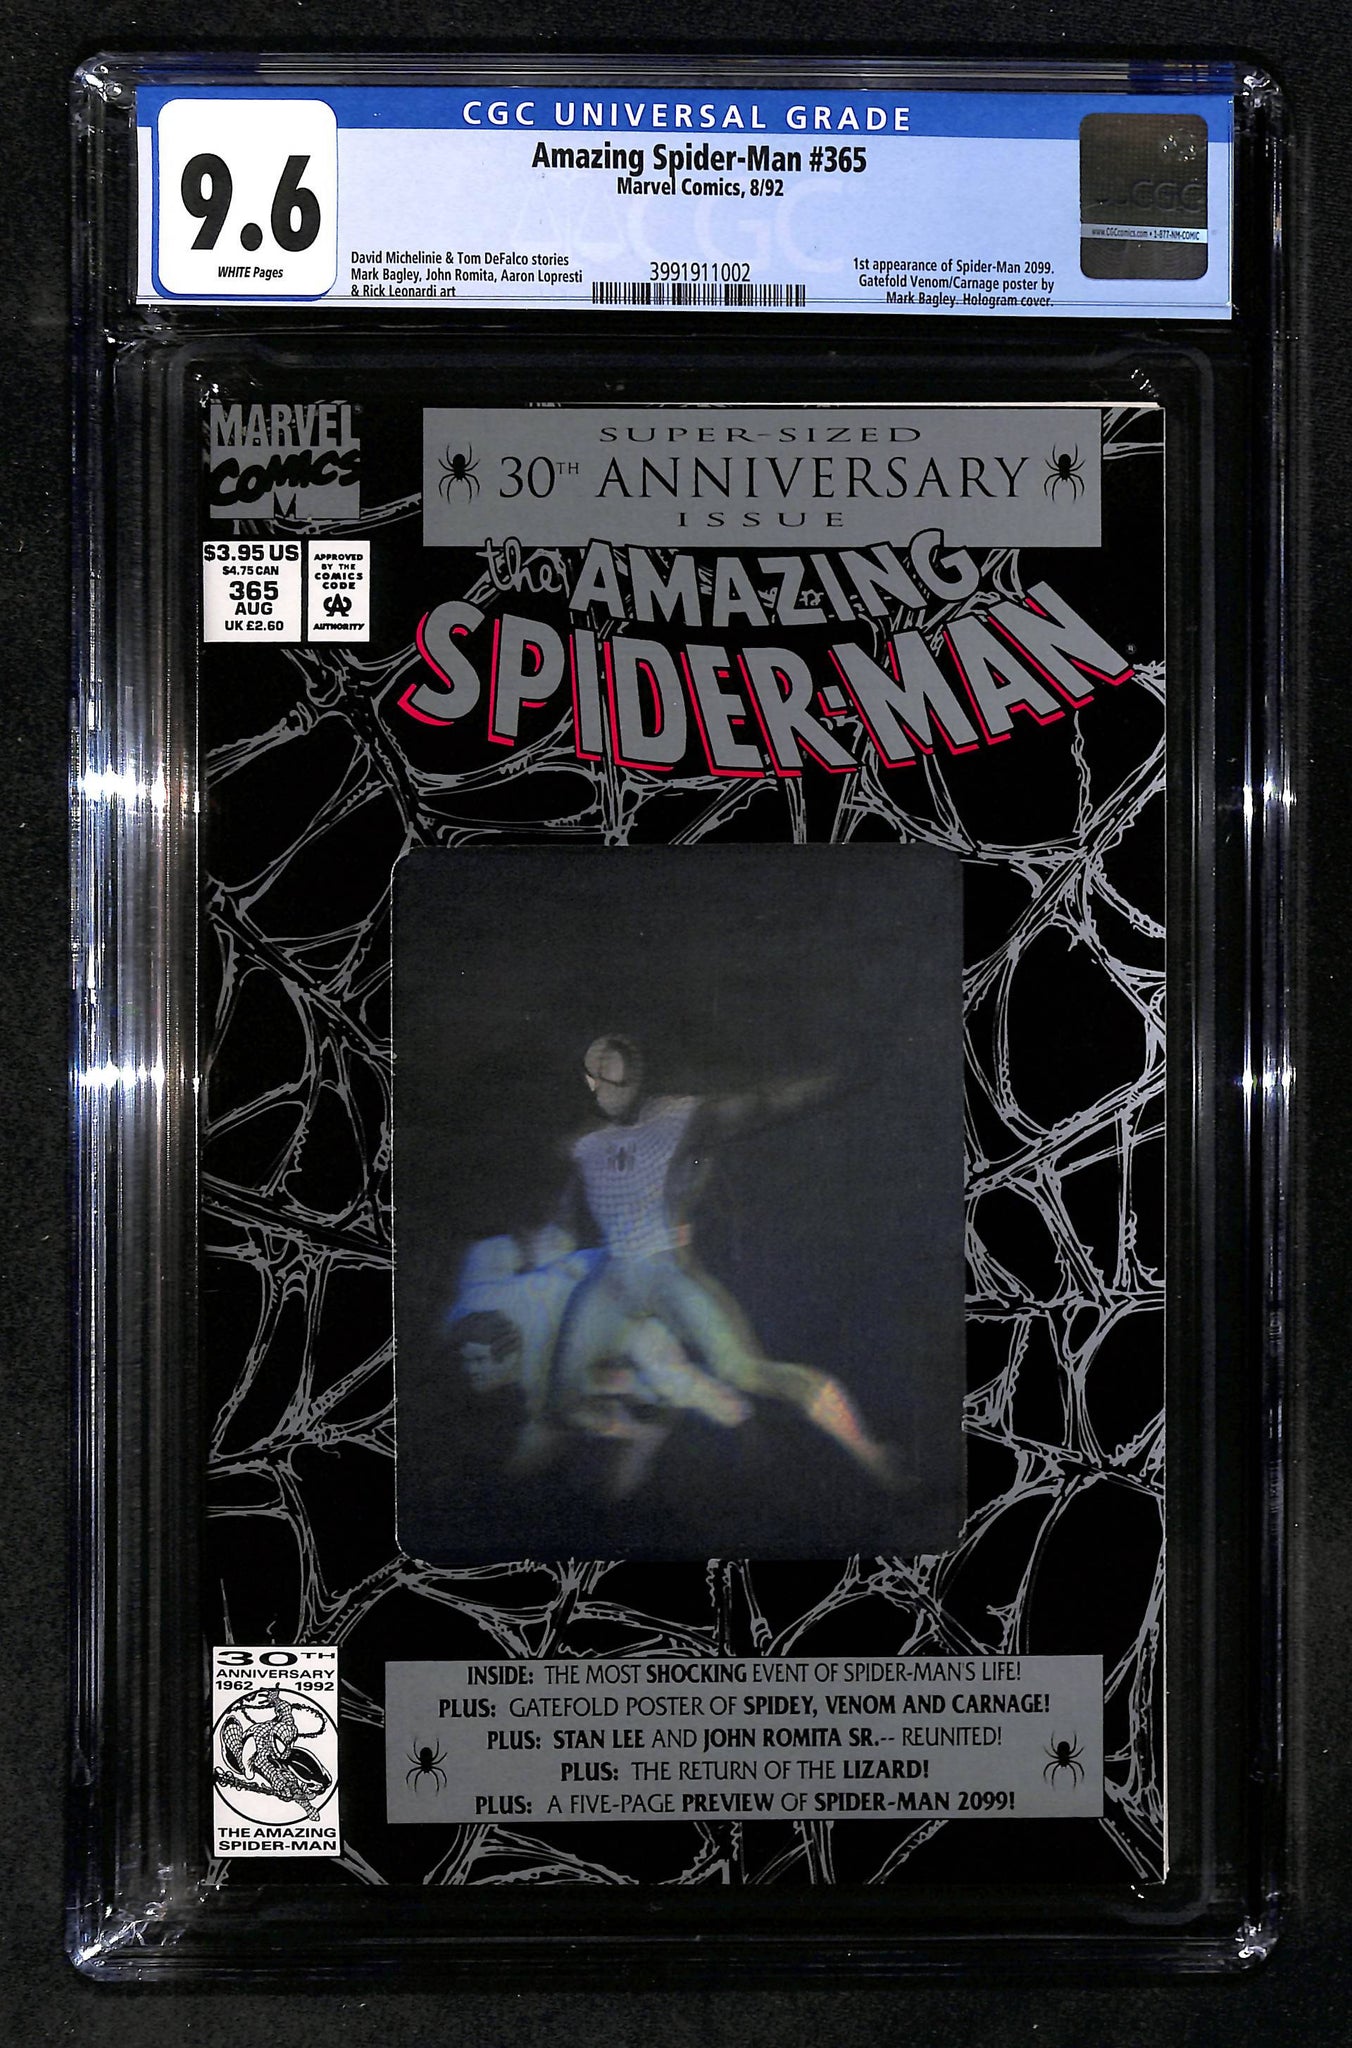 Amazing Spider-Man #365 CGC 9.6 1st appearance of Spider-Man 2099